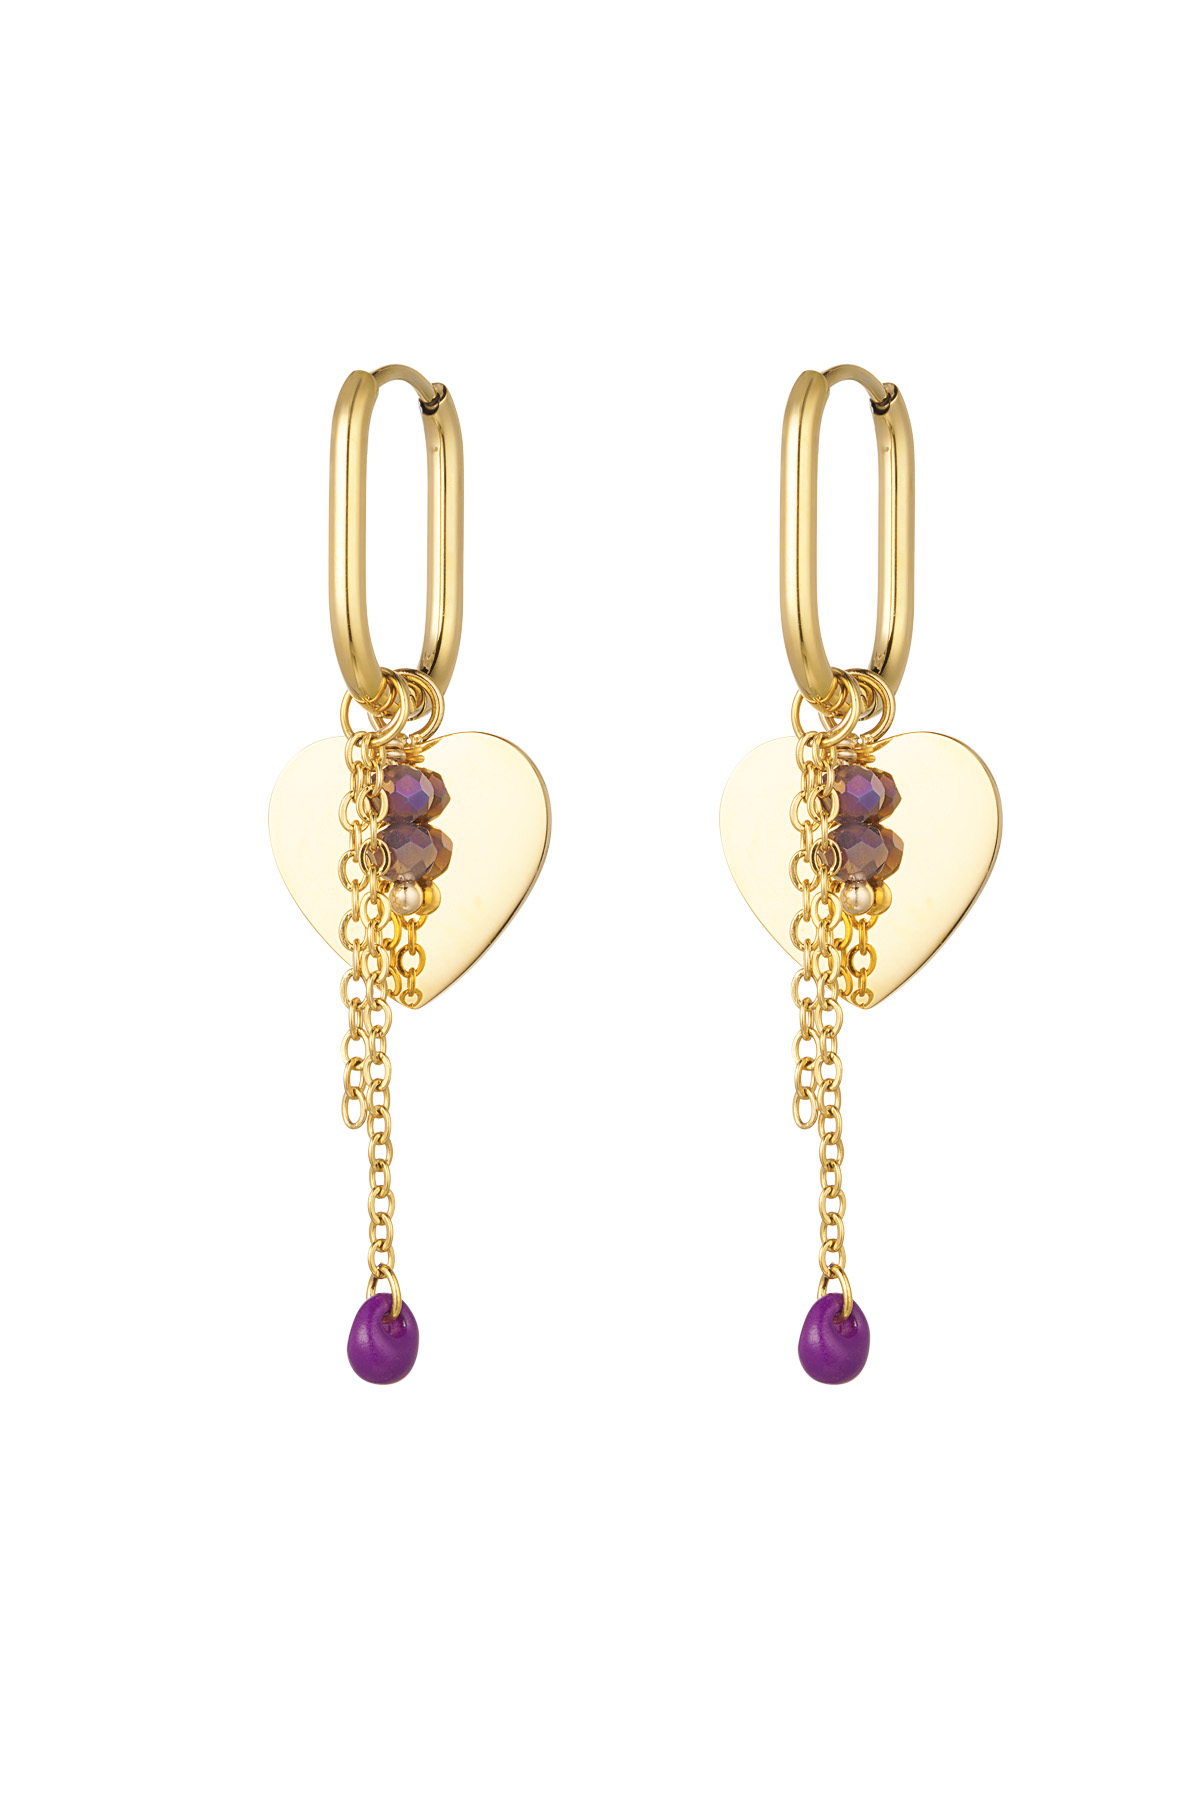 Heart earrings with chain and beads - gold/purple